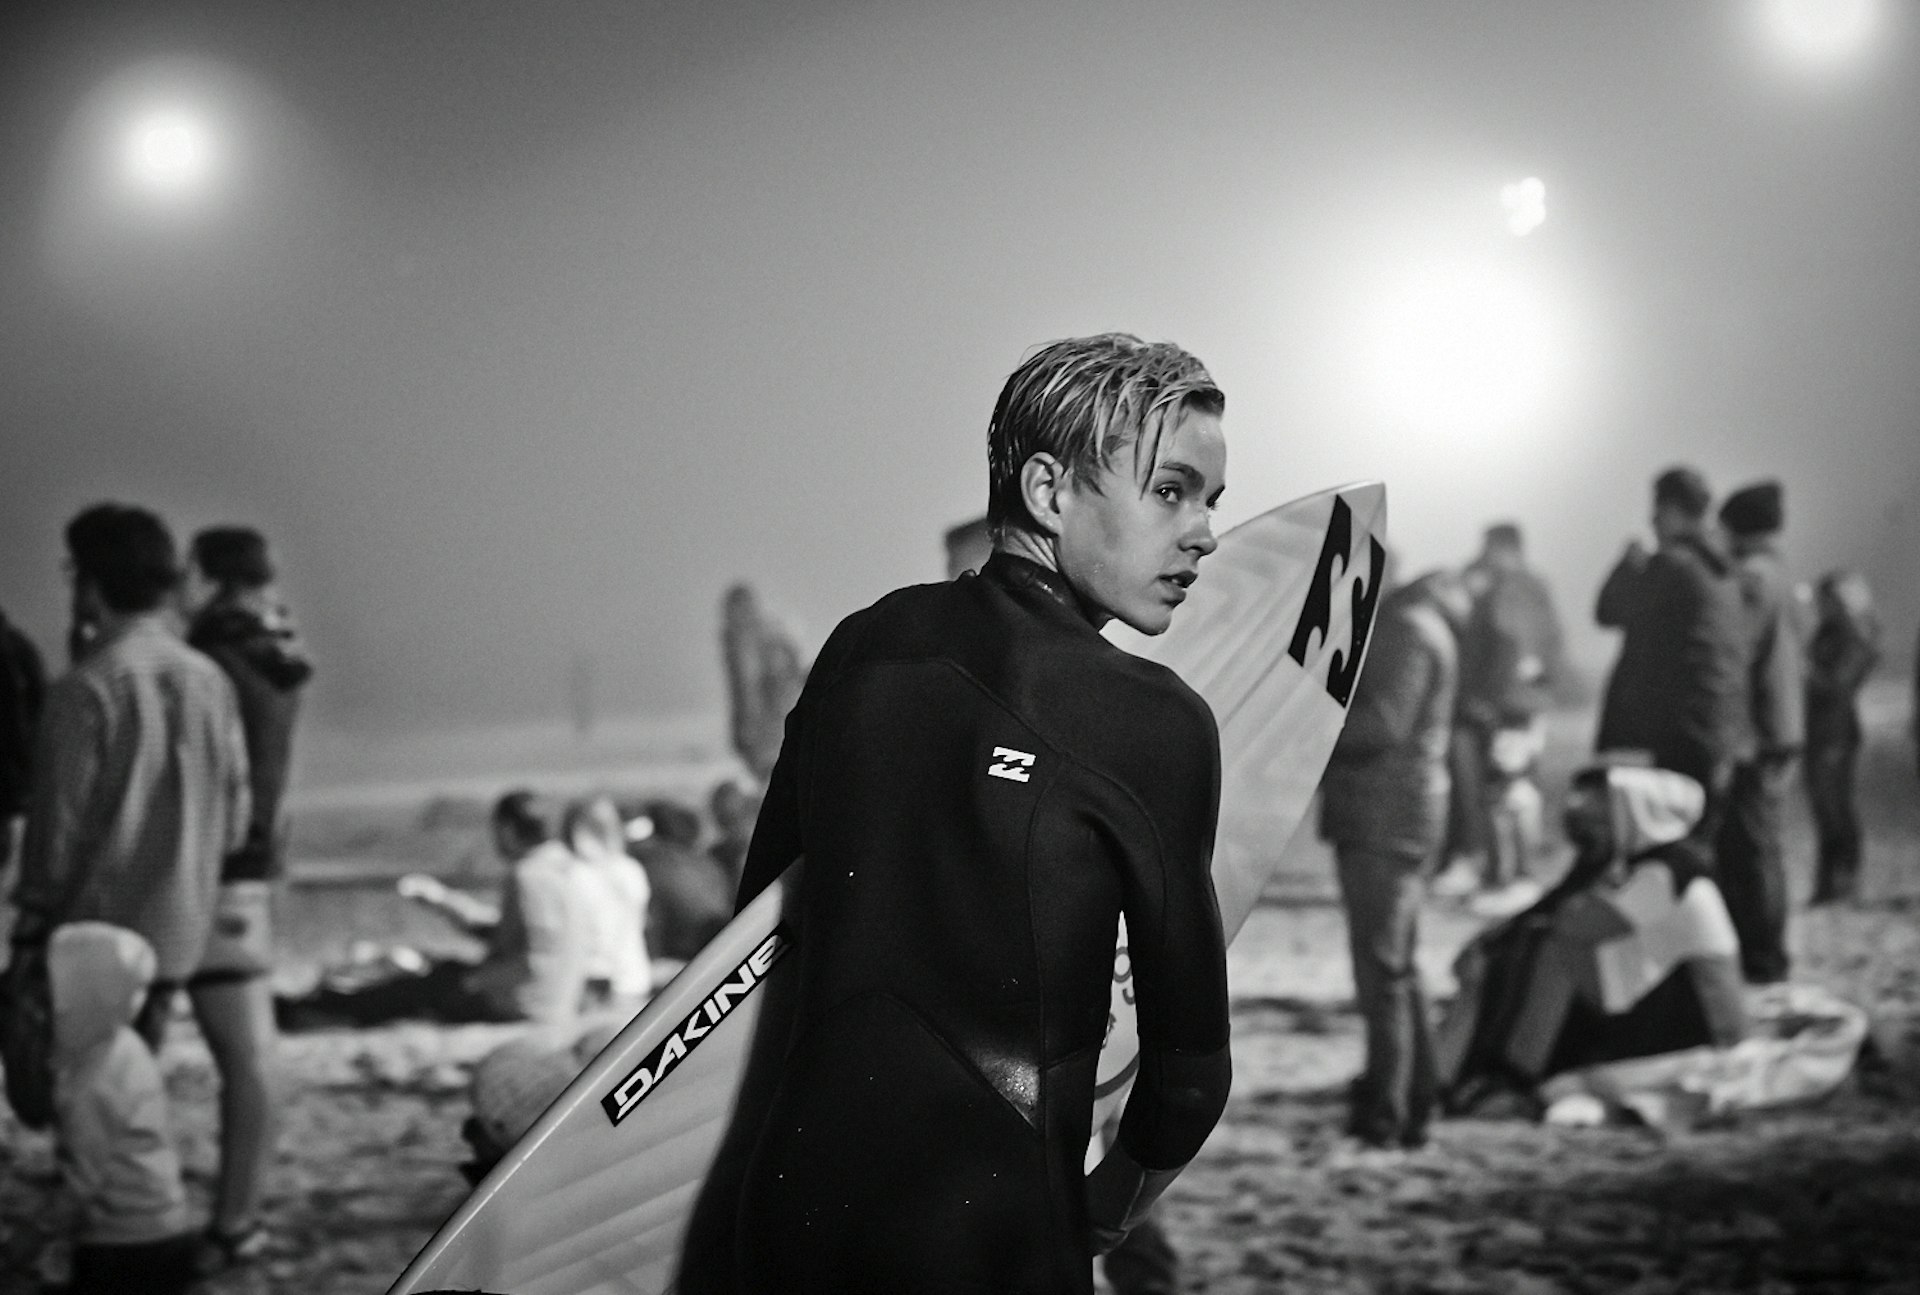 Meet Cornwall's night surfers, in all their moonlit glory